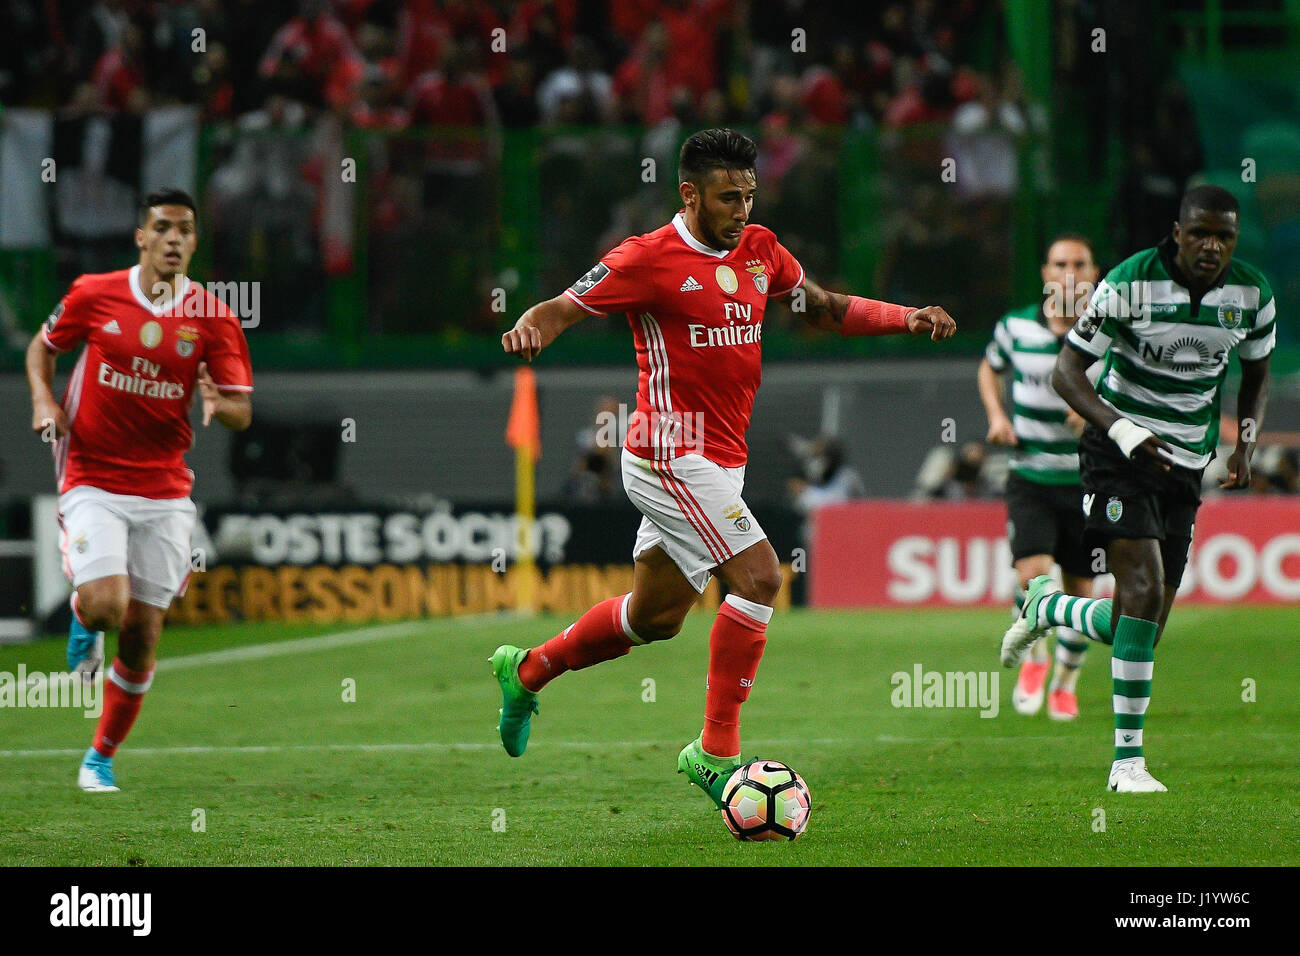 Portugal, Lisbon, April 22, 2017 - FOOTBALL: SPORTING CP x SL BENFICA - Eduardo Salvio #18 Benfica midfielder from Argentina in action during Portuguese First League football match between Sporting CP and SL Benfica in Alvalade Stadium on April 22, 2017 in Lisbon, Portugal. Photo: Bruno de Carvalho/Alamy Live News Stock Photo